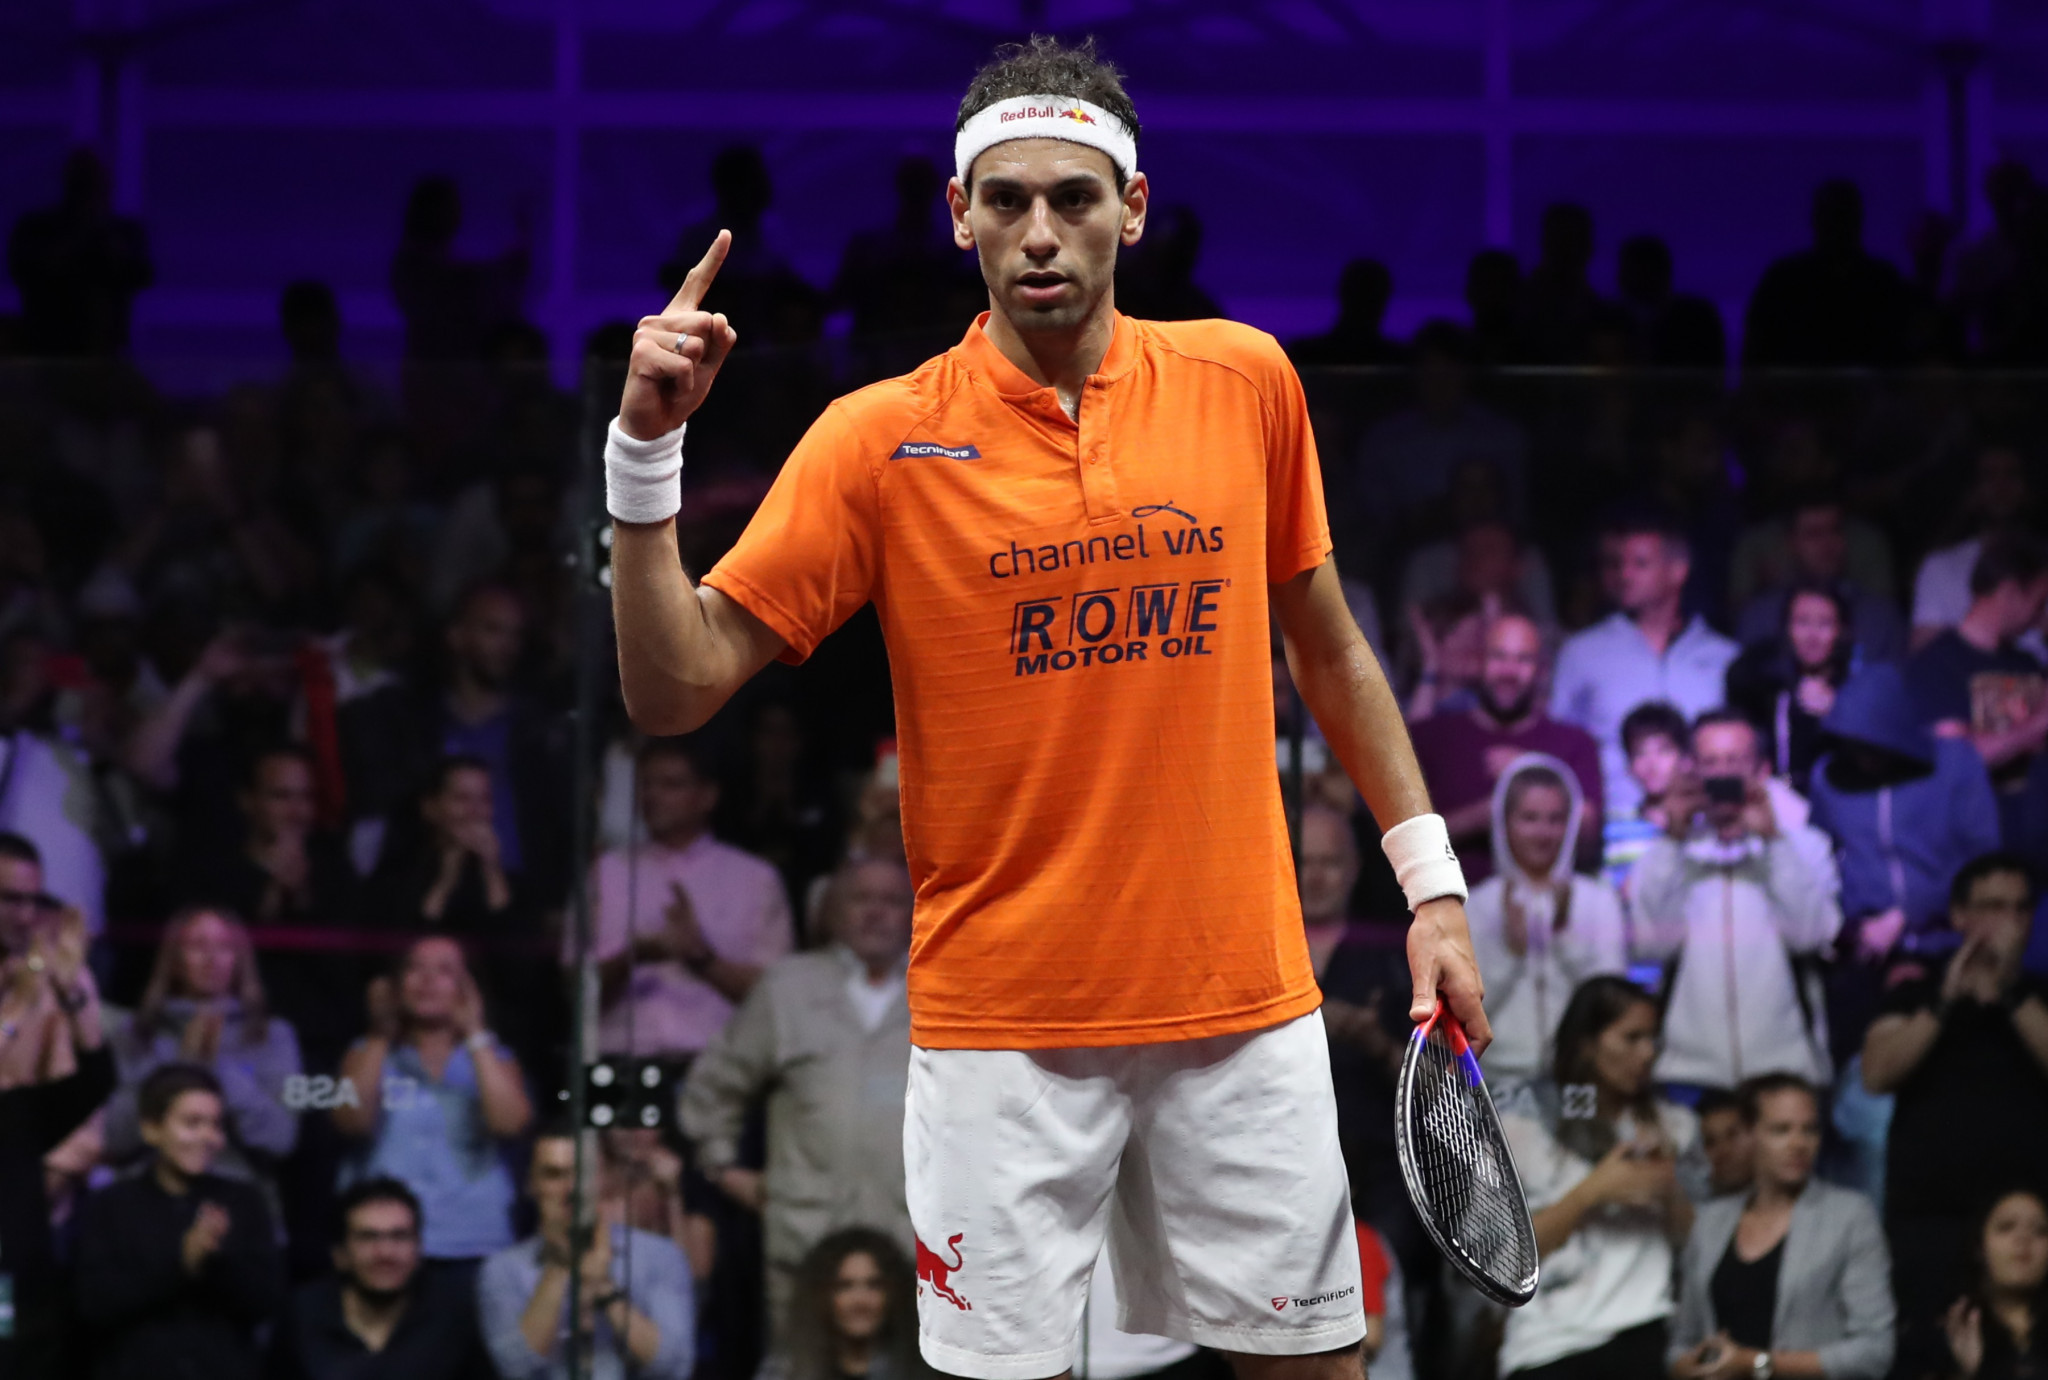 Mohamed Elshorbagy up to eighth on PSA all-time winners list with Grasshopper Cup triumph 